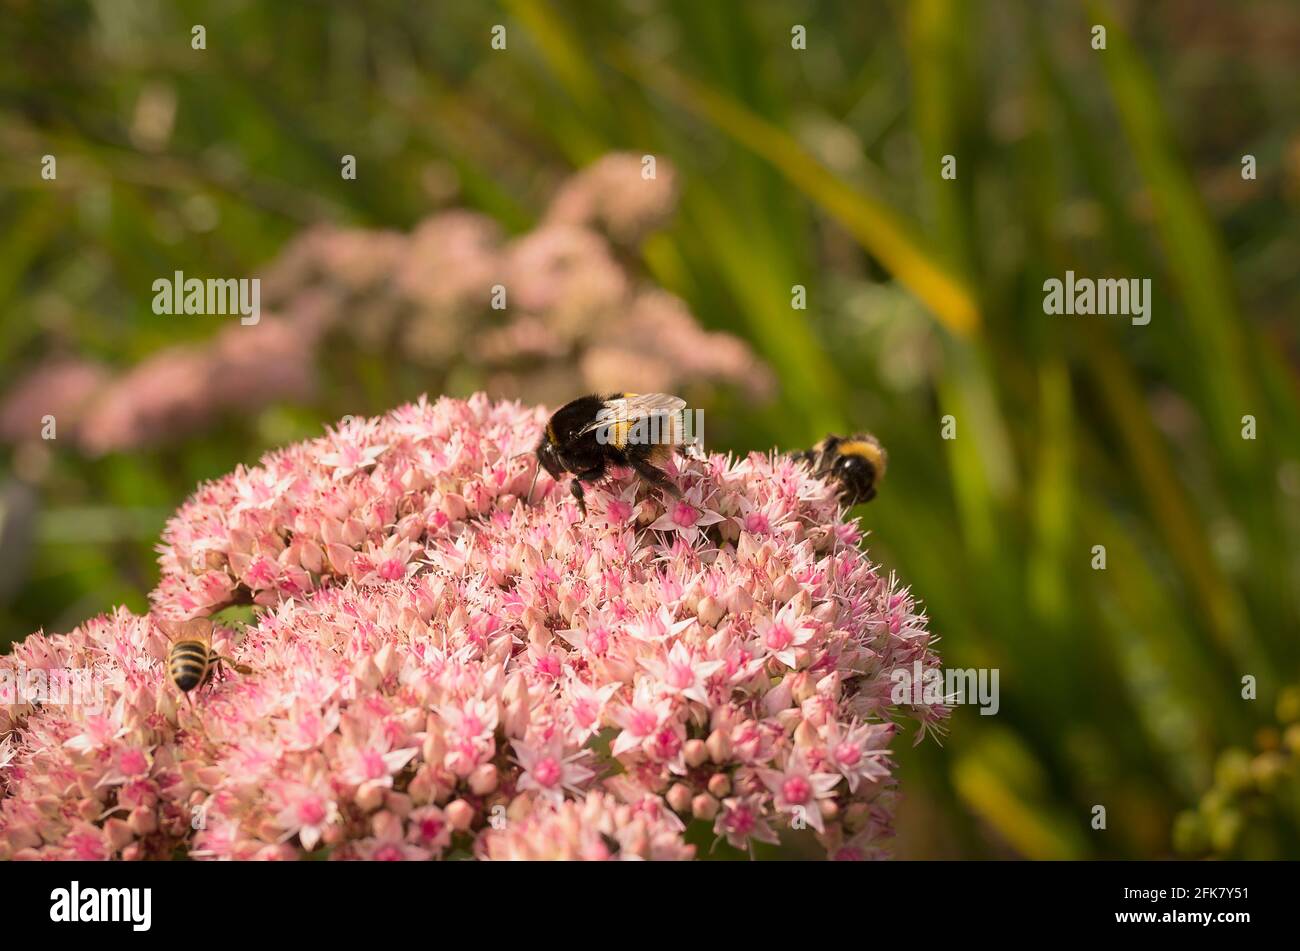 Bees and other winged insects collecting pollen from the flowers of Sedum spectabile in Autumn in an English garden Stock Photo